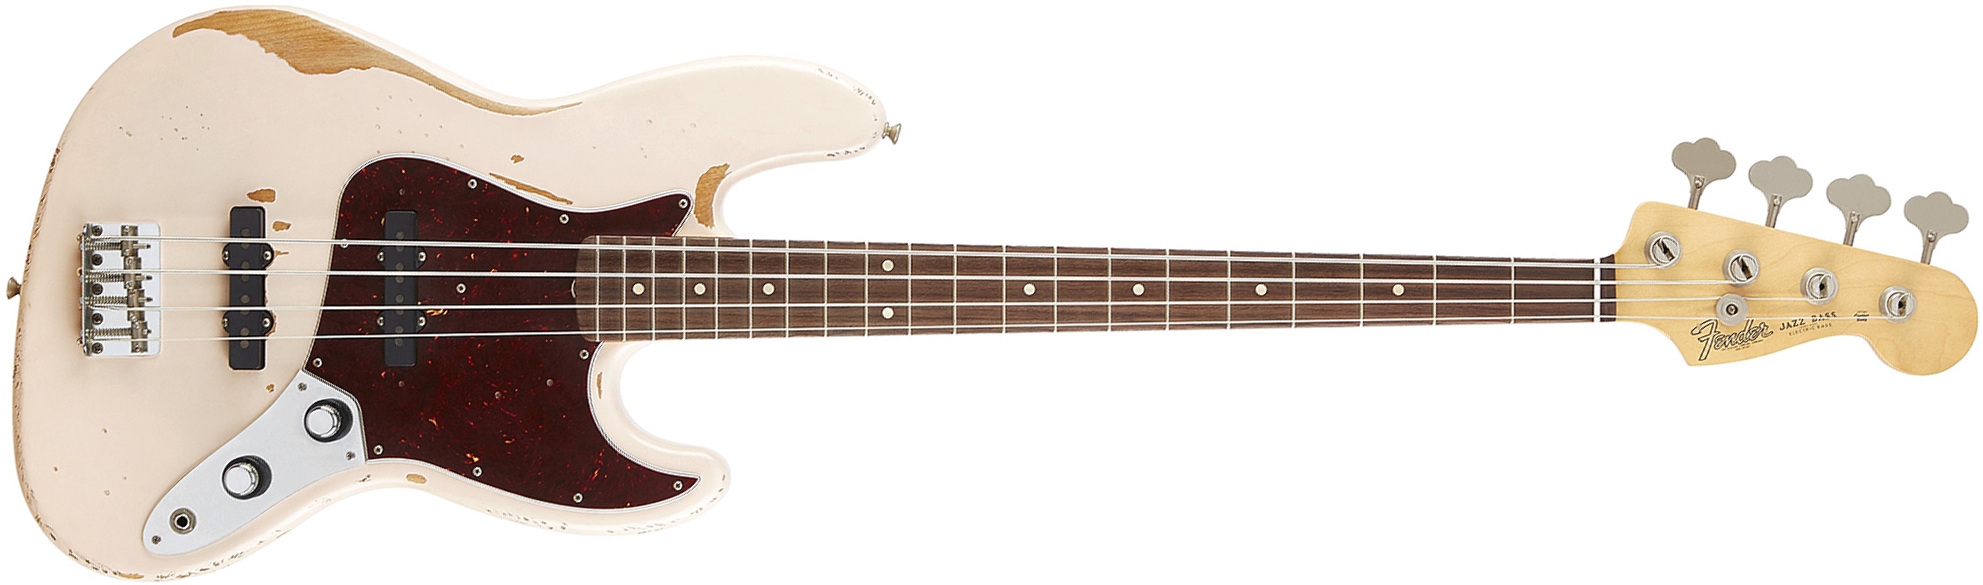 Fender Jazz Bass Flea Artist Signature Mex Rw 2016 - Road Worn, Shell Pink - Solid body electric bass - Main picture